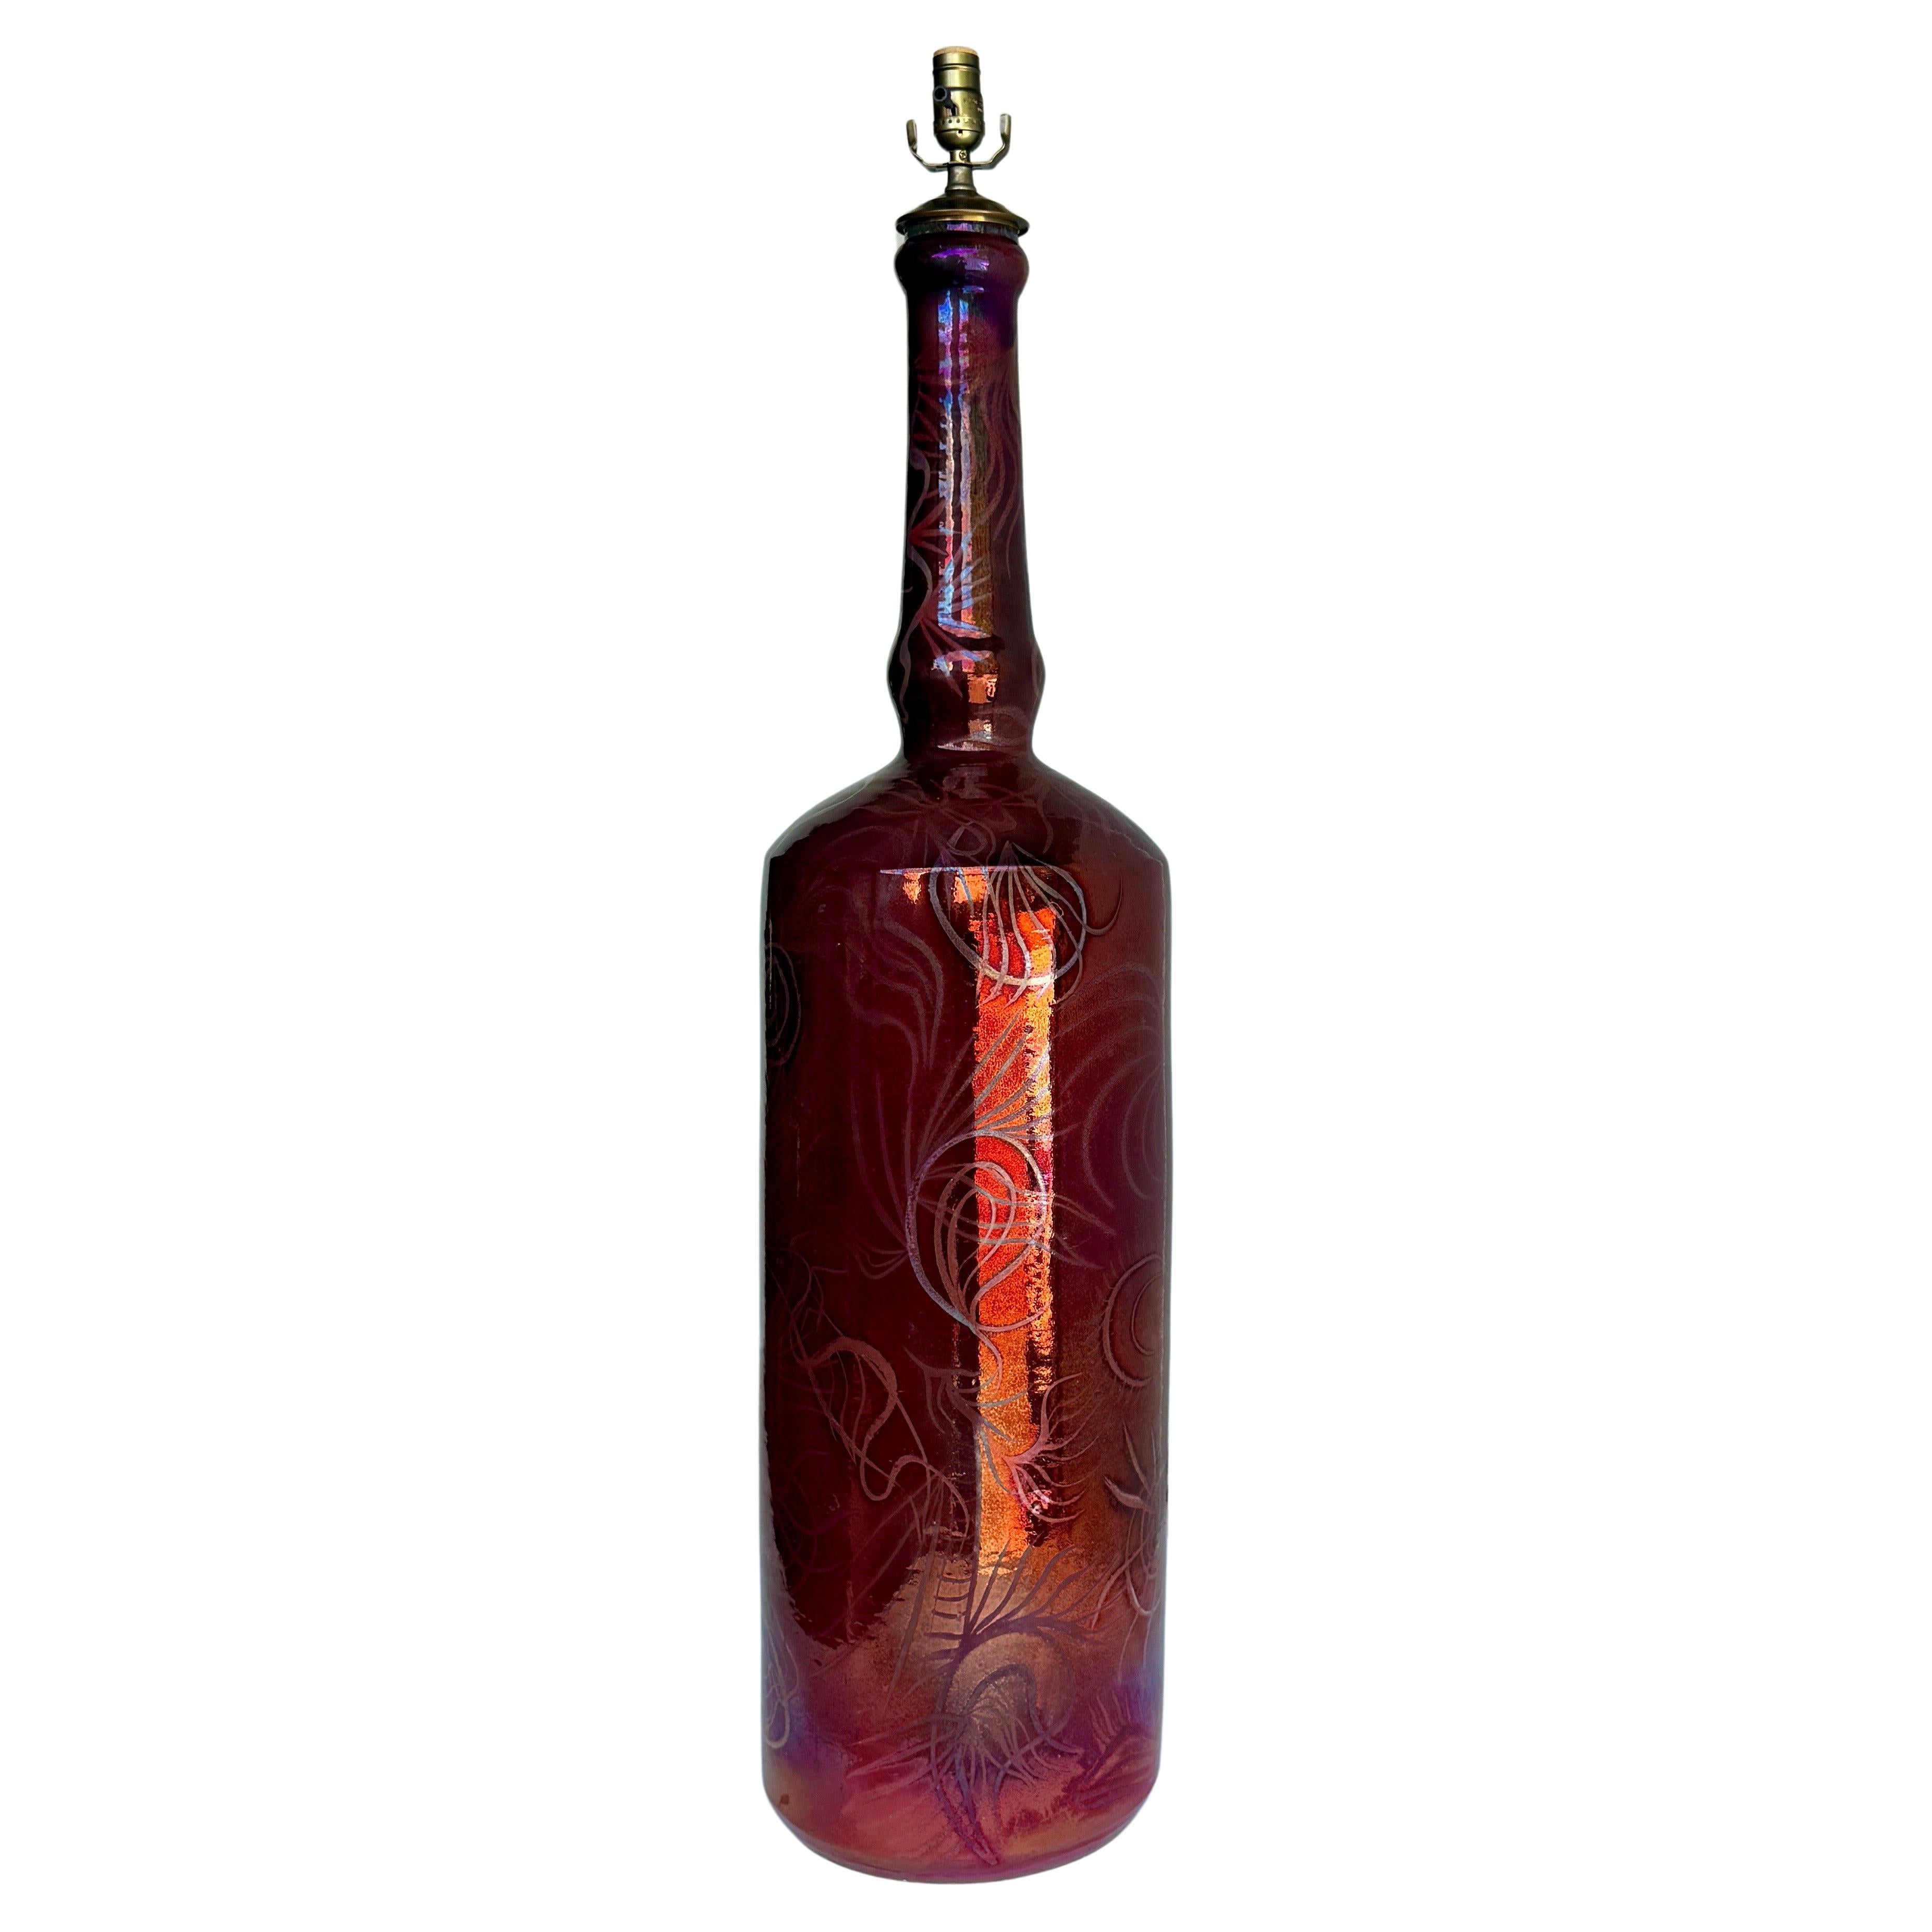 Oversized MCM Colored Glazed Bottle Floor Lamp, 1960’s

Very impressive MCM Lamp with lots of character. This oversized floor lamp has exquisite details including etched drawings within the glass. Every angle of this lamp reveals a different unique